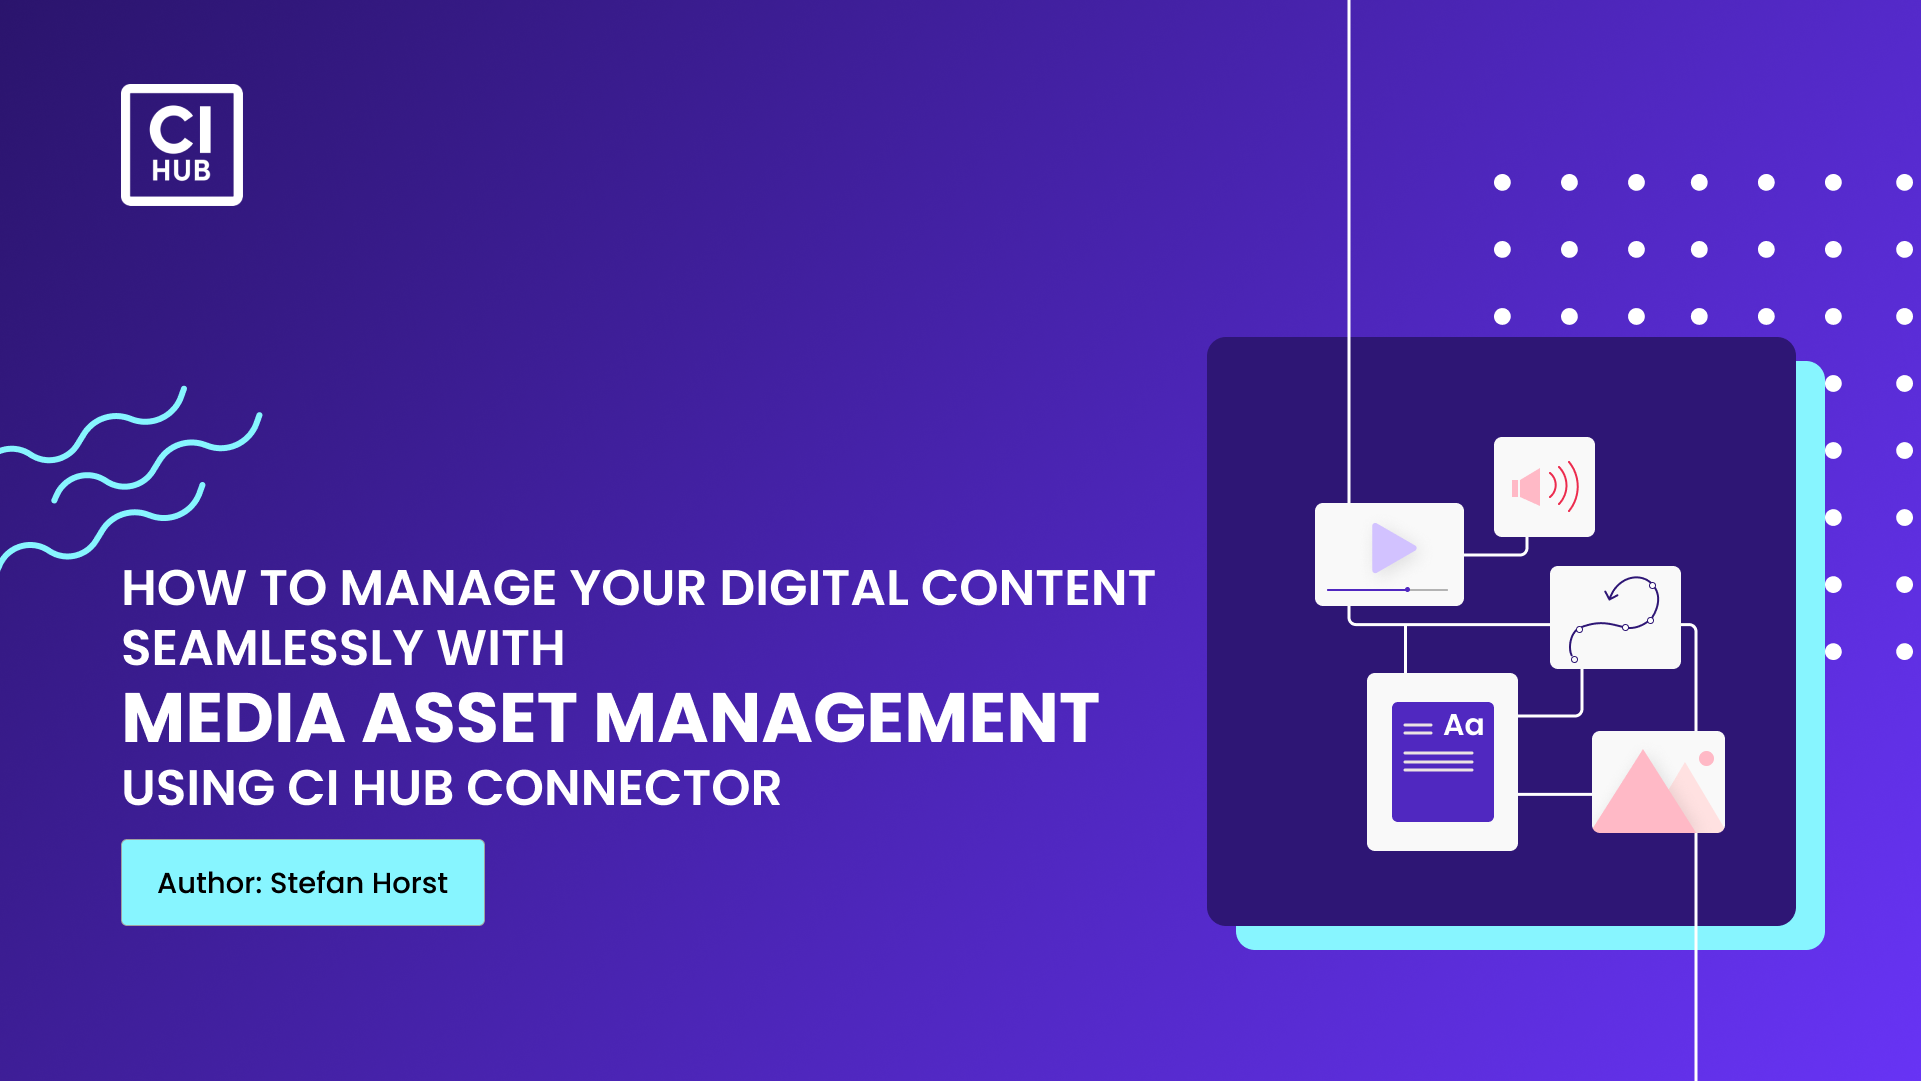 How to manage your digital content seamlessly...